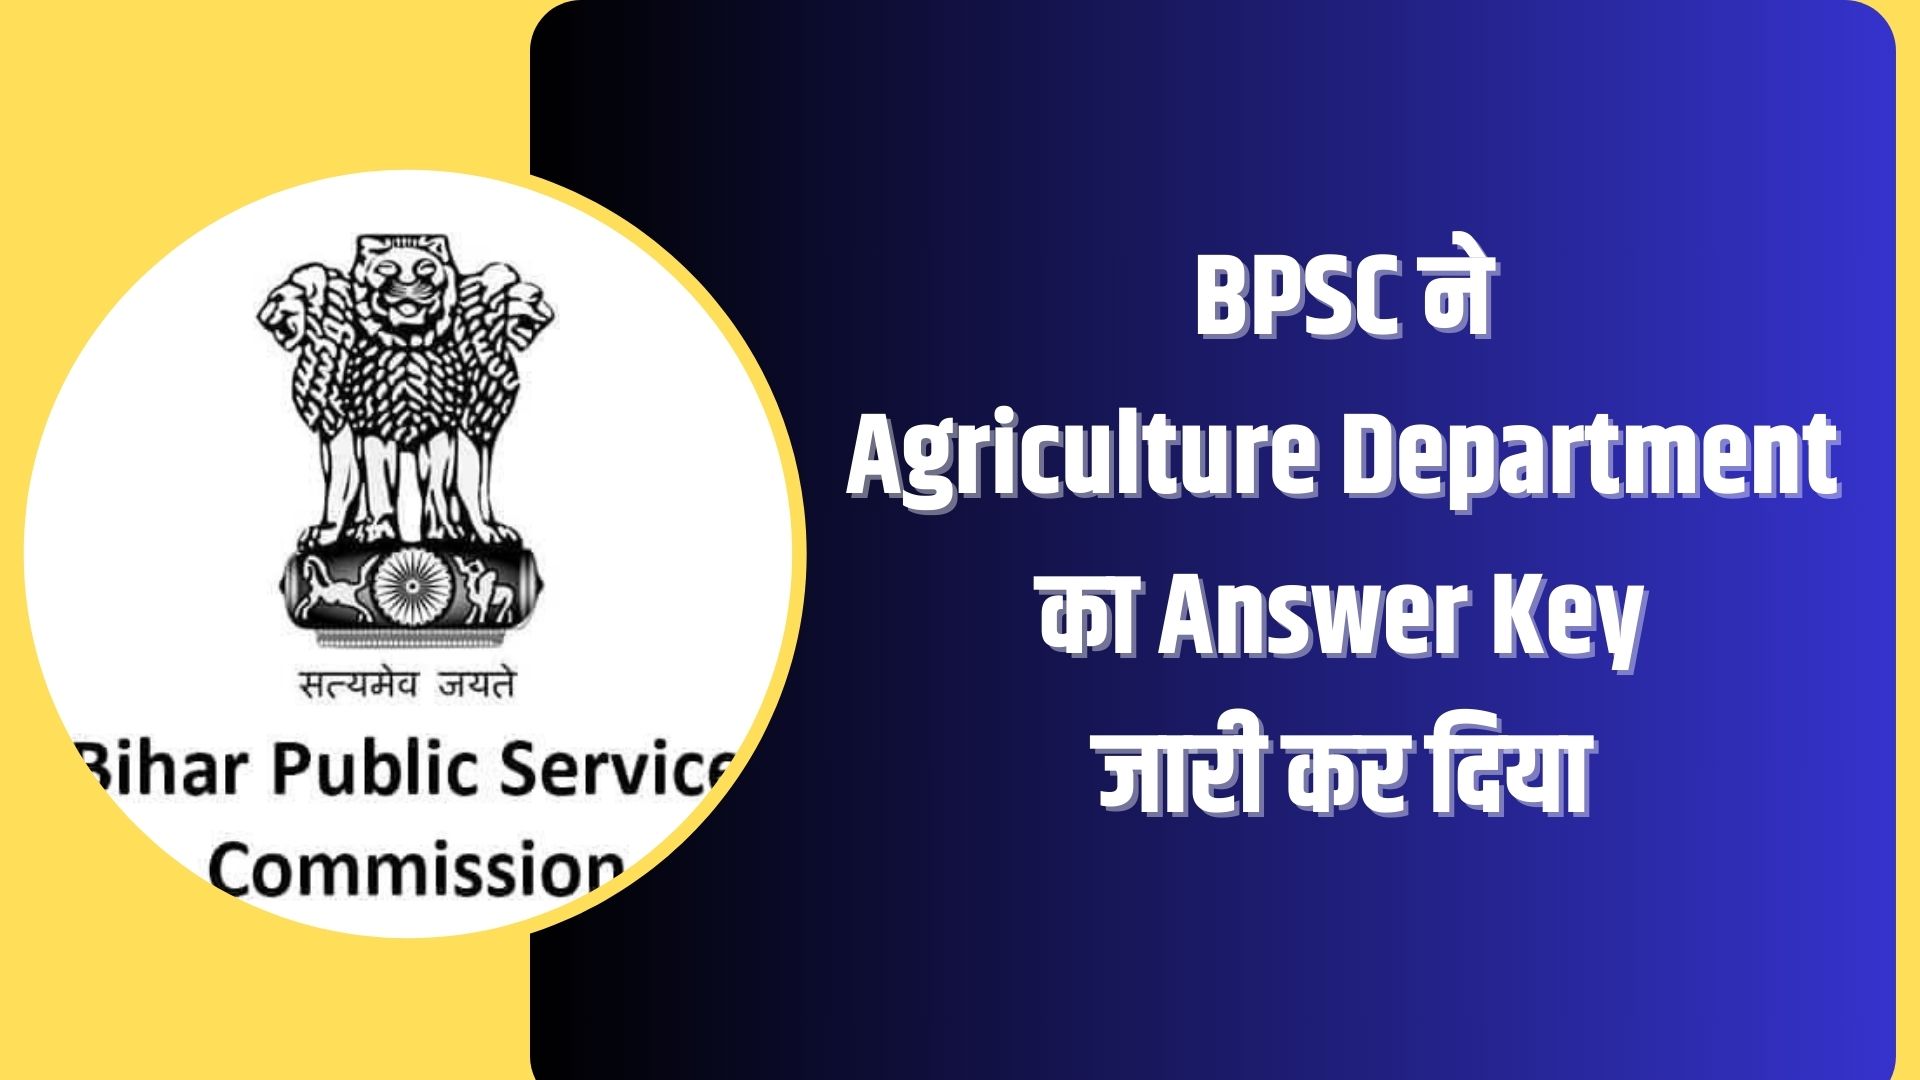 BPSC Agriculture Dept final answer key